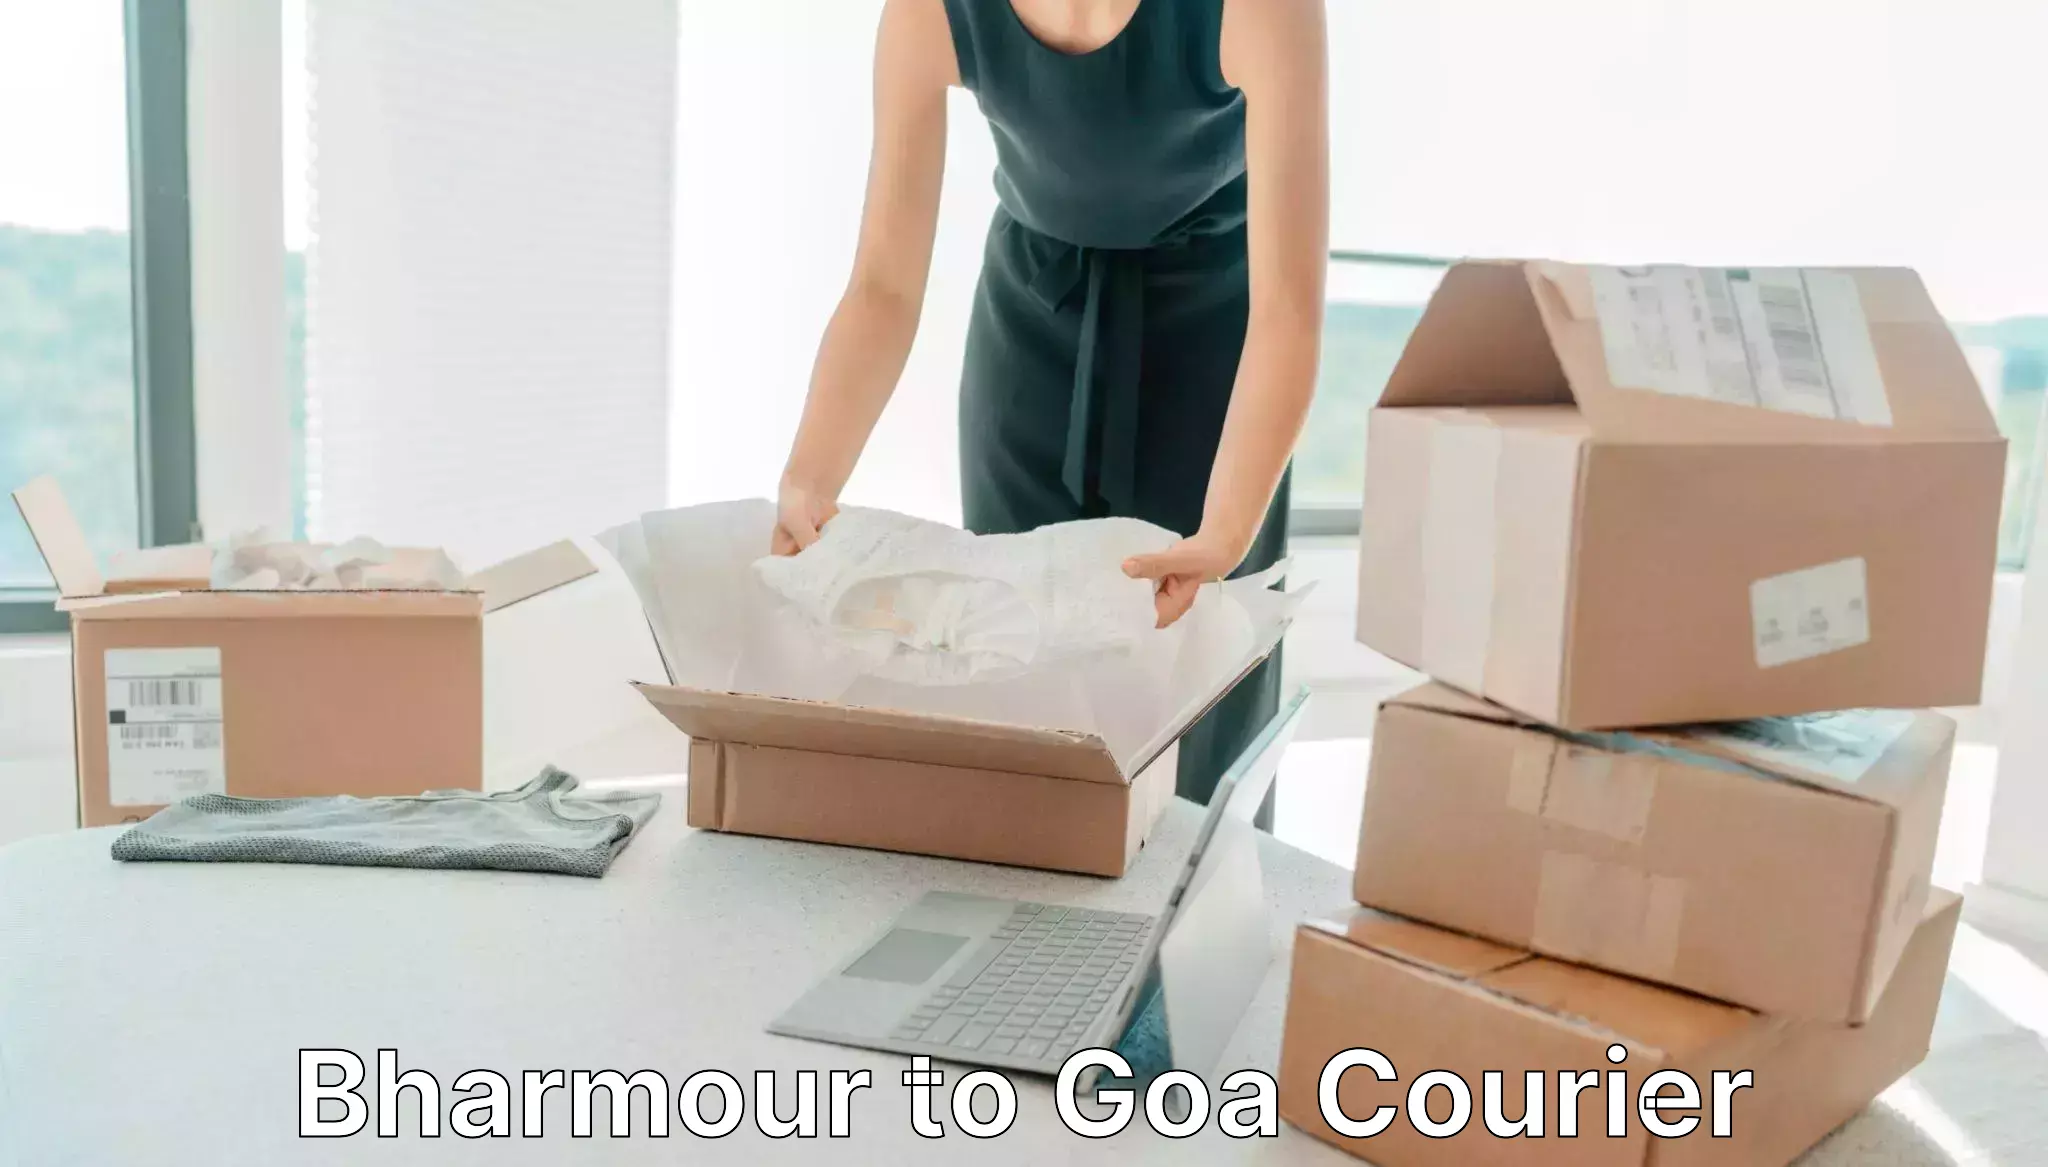 Professional courier handling Bharmour to Goa